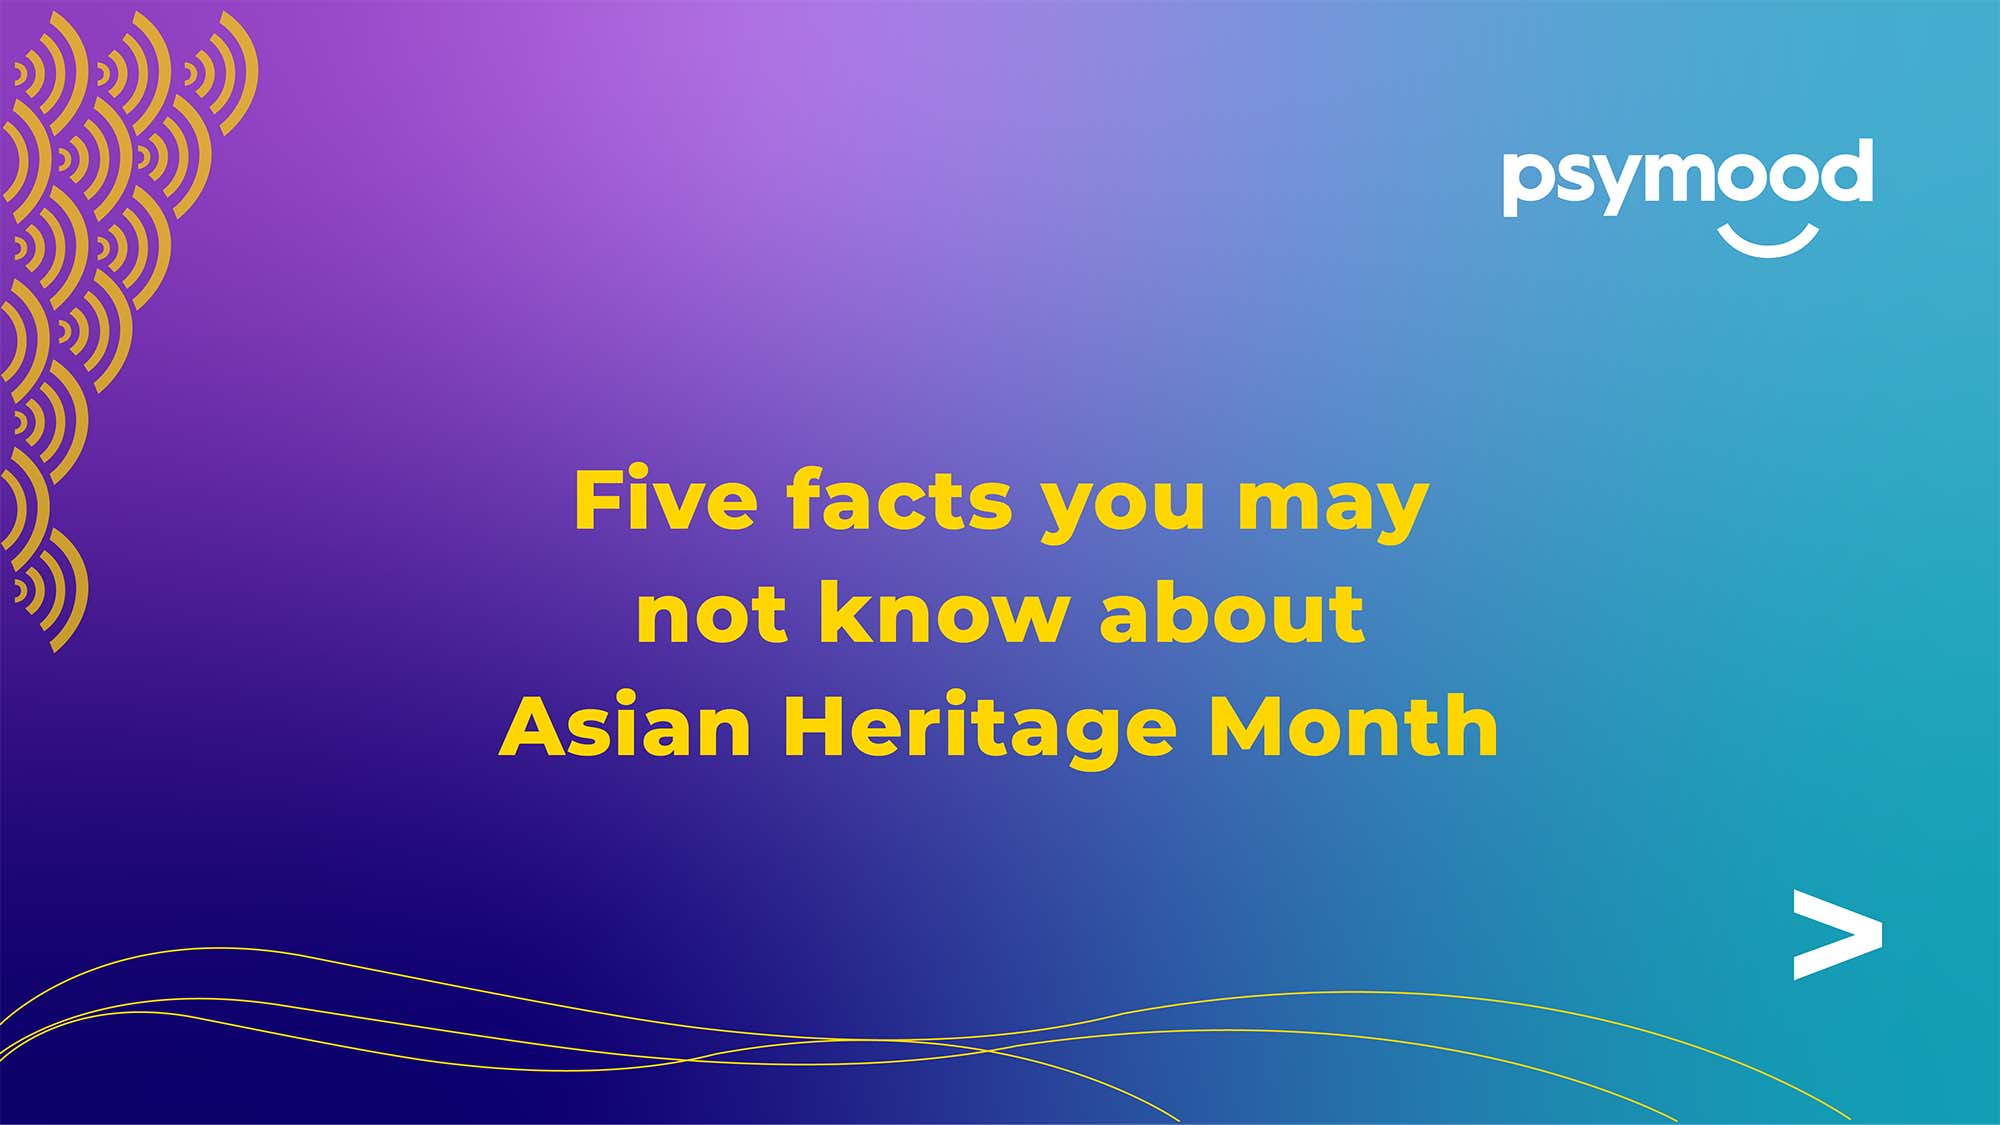 Five facts you may not know about Asian Heritage Month